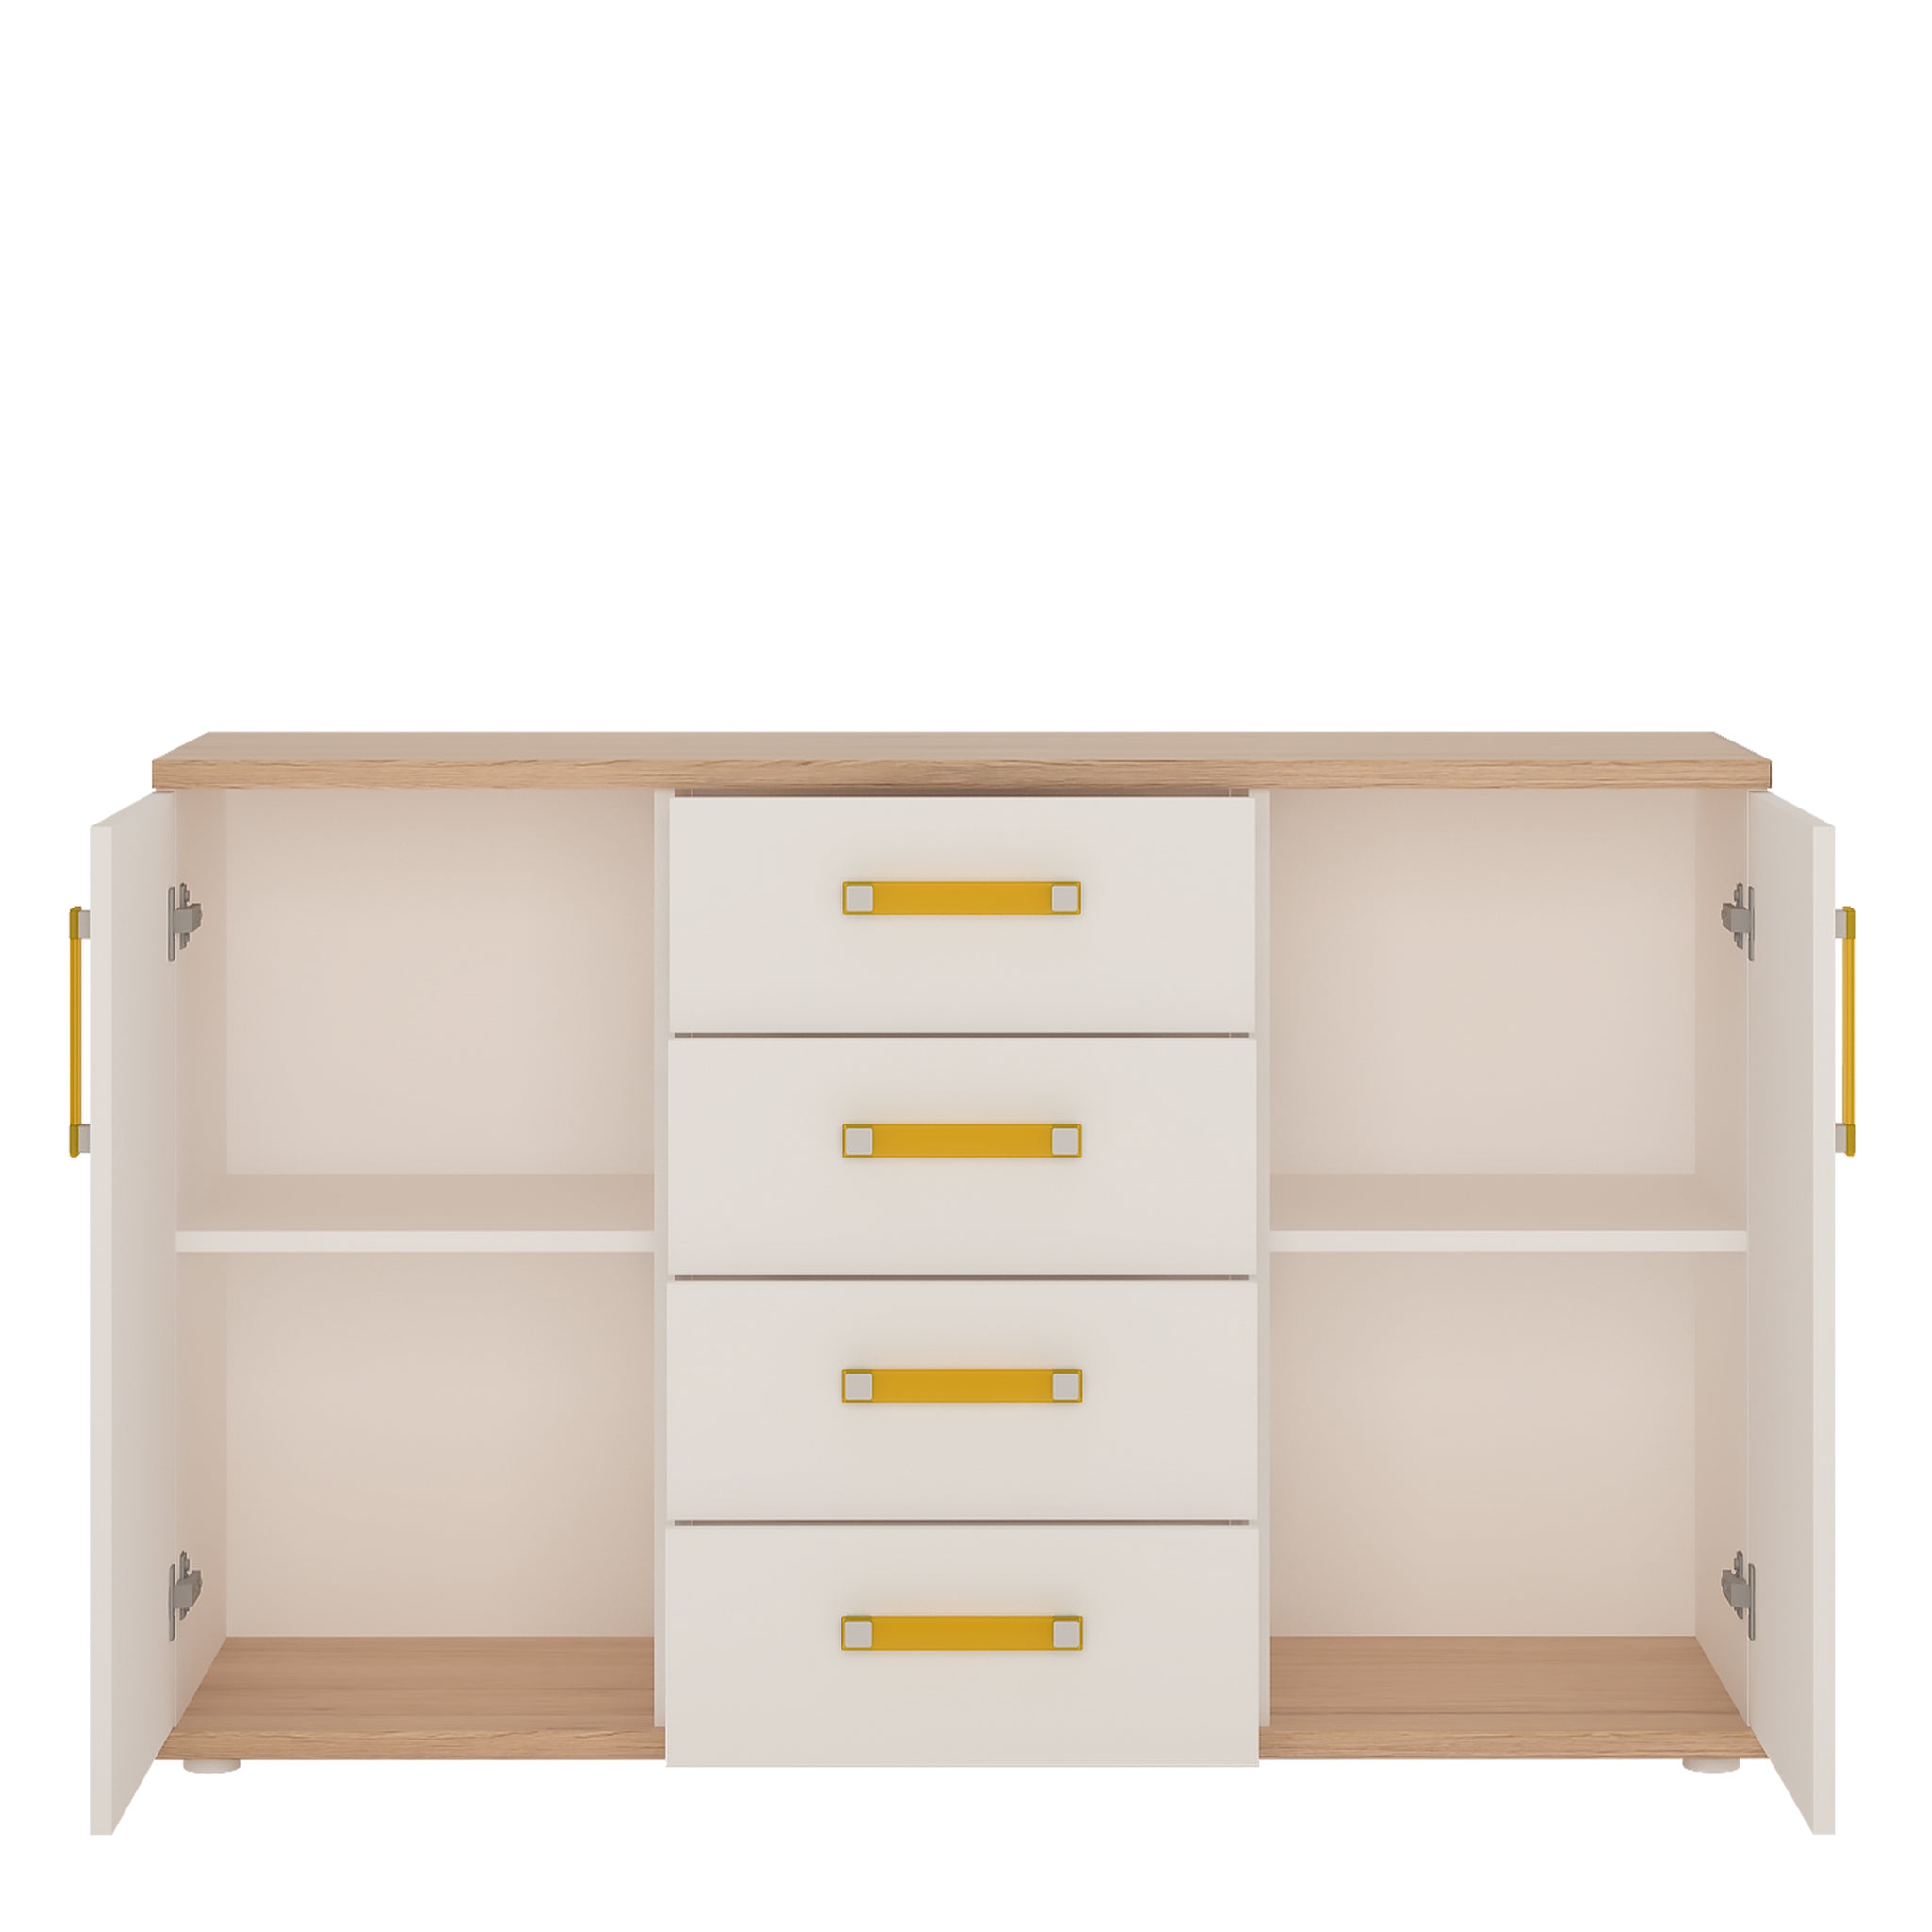 To Play 2 Door 4 Drawer Sideboard in Light Oak and white High Gloss (orange handles)